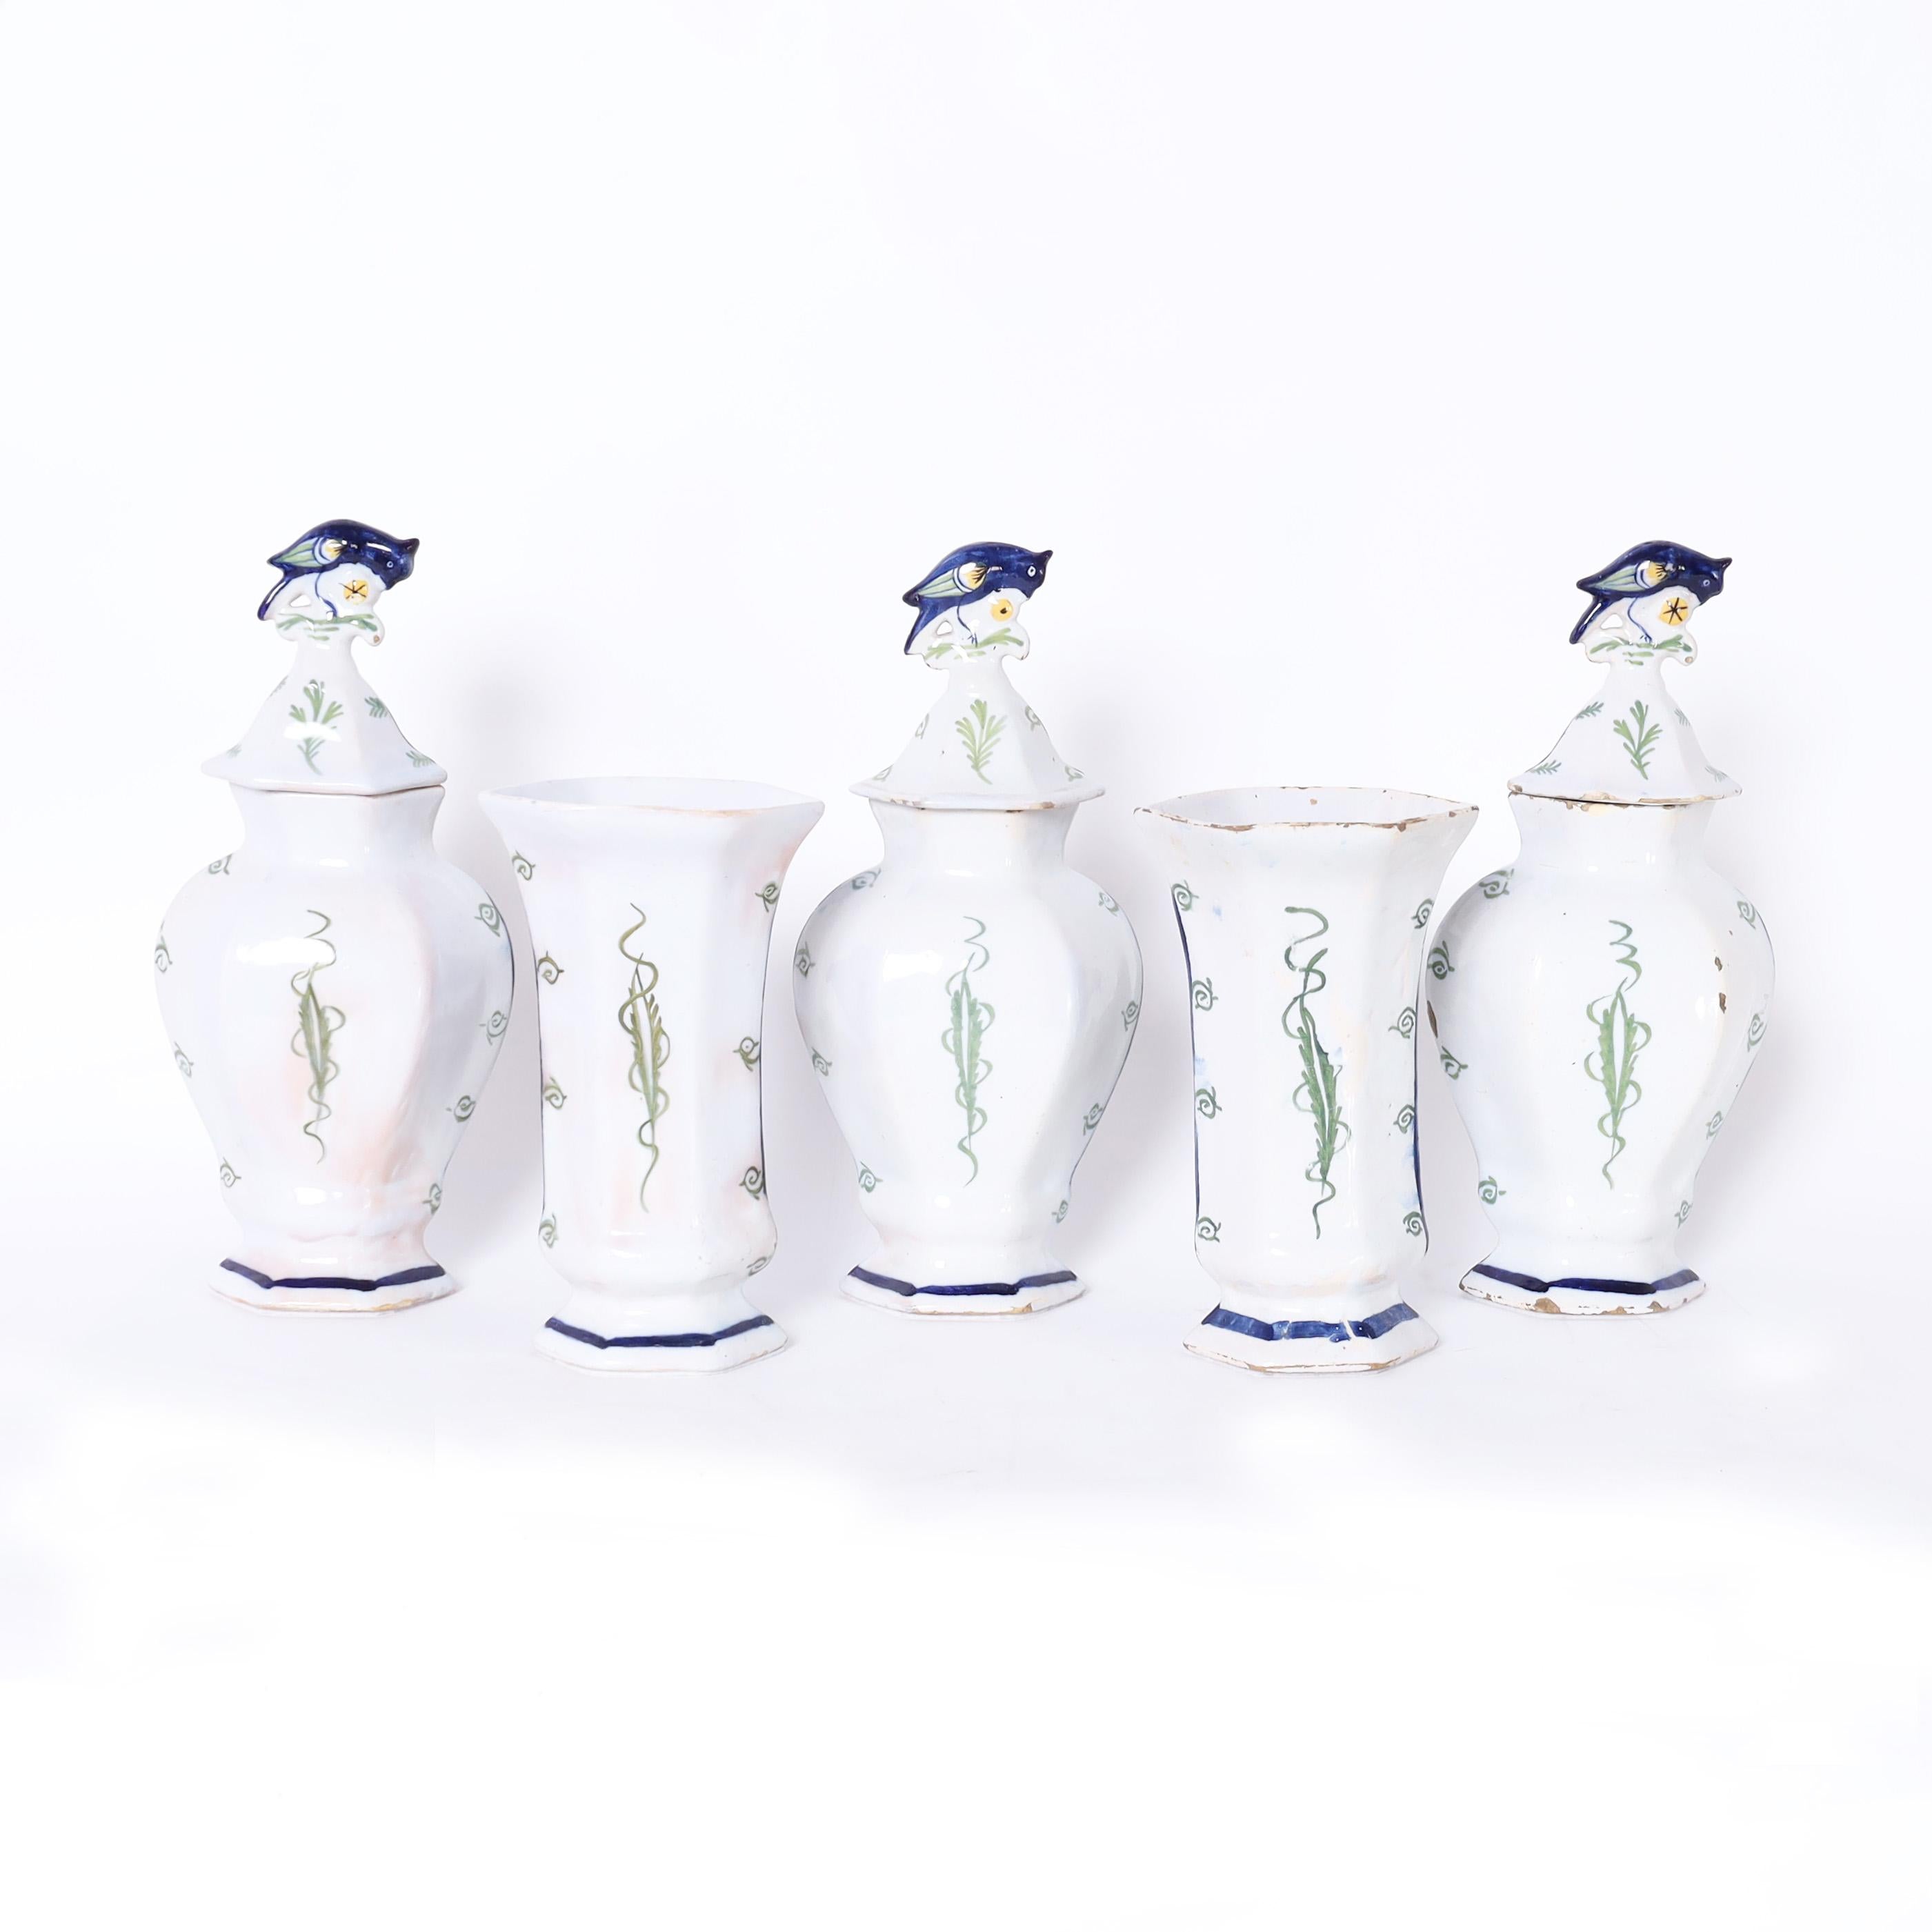 Rare and remarkable group of five Dutch 18th century Delftware pieces, three lidded urns, and two vases crafted in terra cotta and polychrome decorated with floral motifs and glazed. Signed with the makers marks on the bottoms.

Urns- H: 13 W: 6 D: